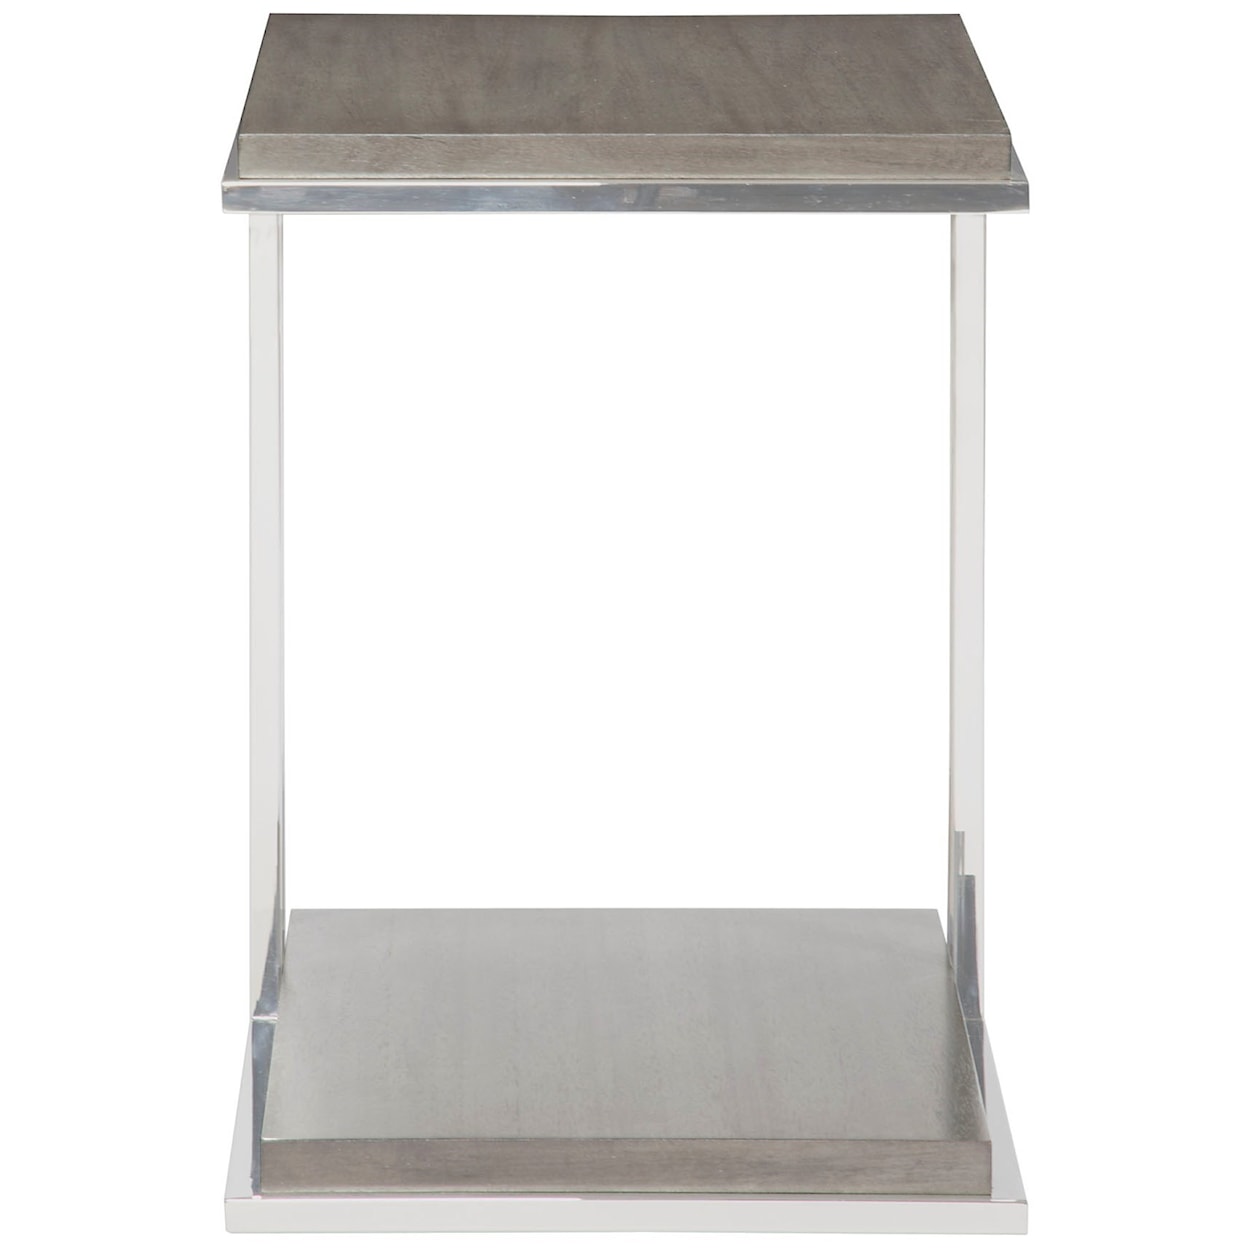 Vanguard Furniture Michael Weiss Phipps End Table